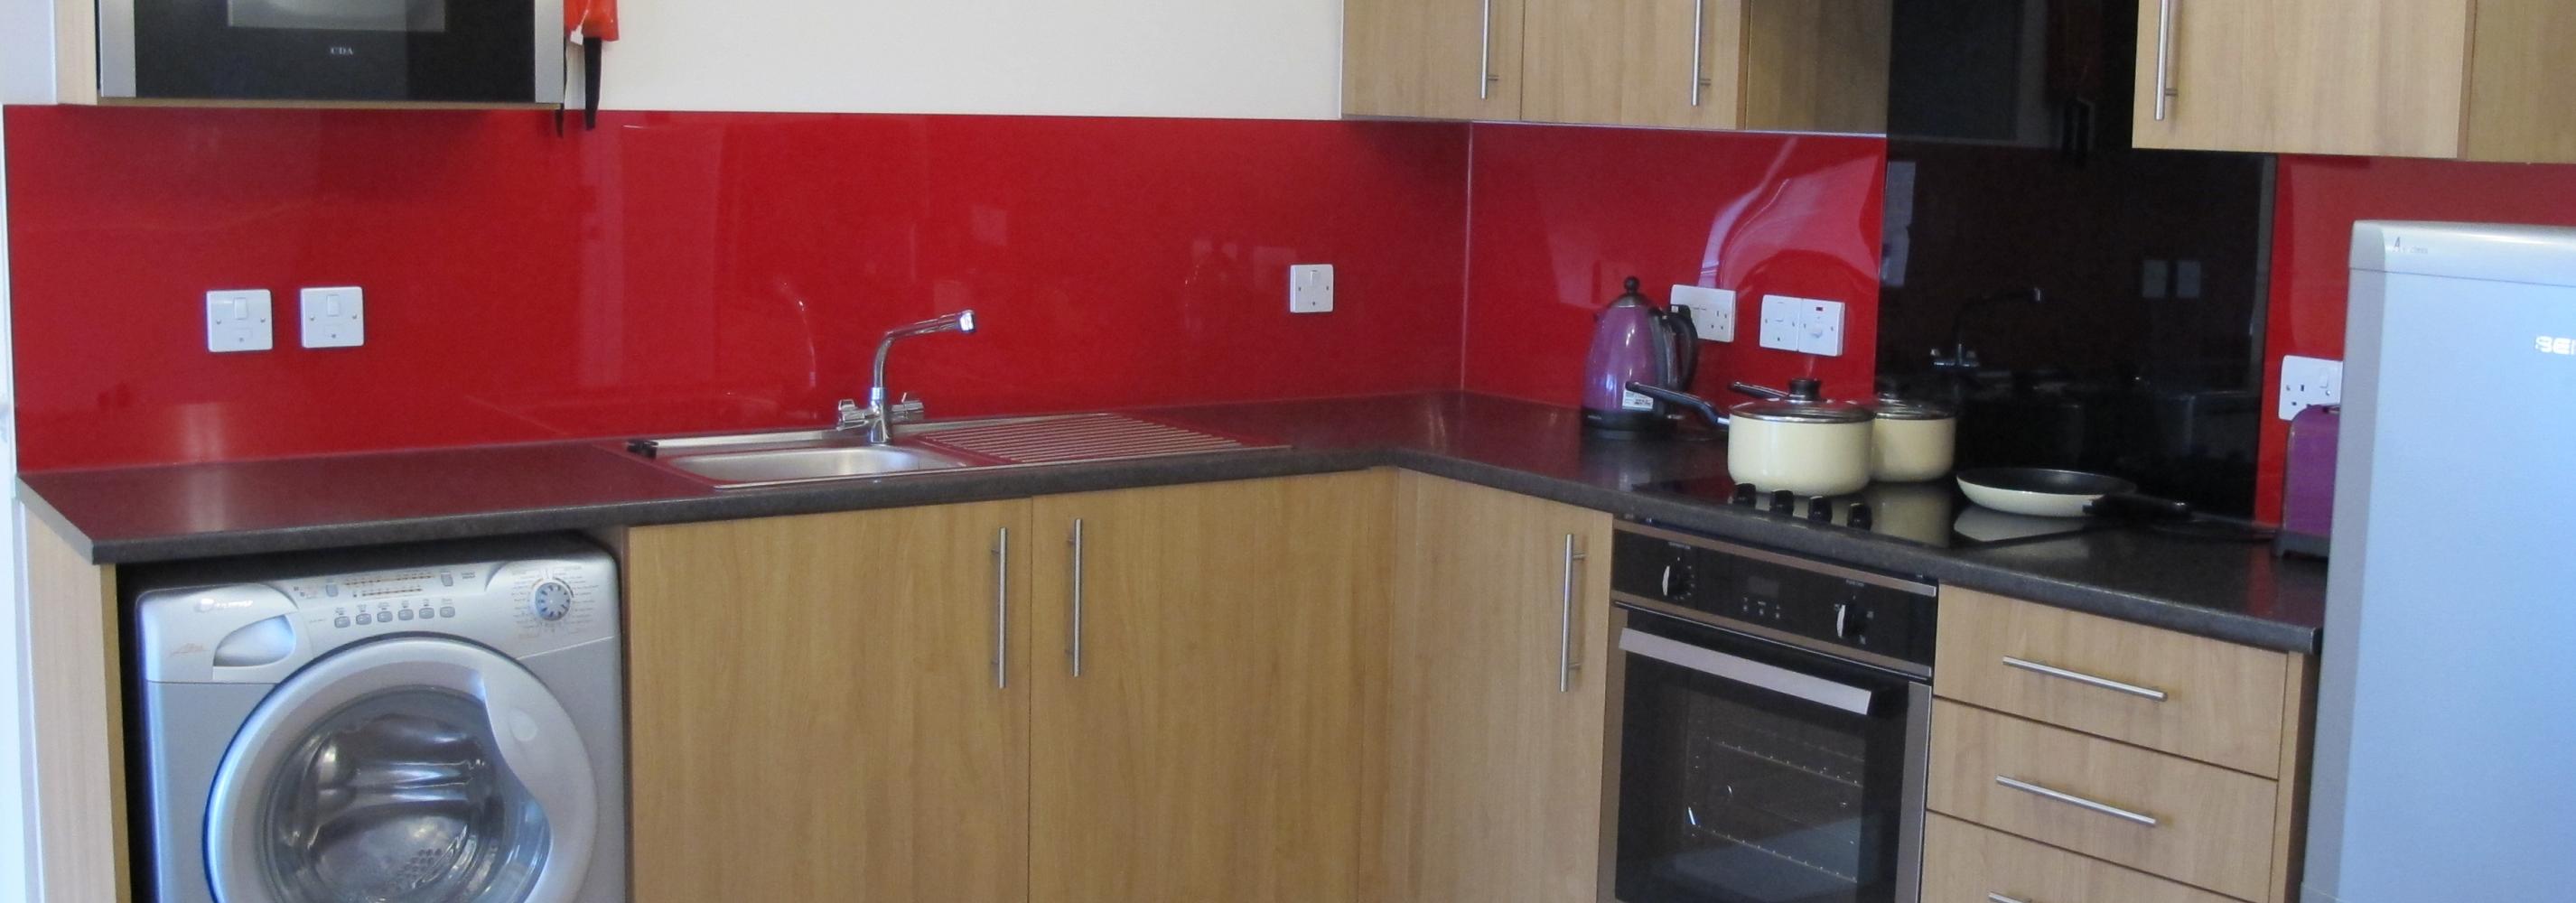 Kitchen, silver washing machine, oven, hob, extractor fan, 11 kitchen cupboards and draws, silver fridge, kettle and sink